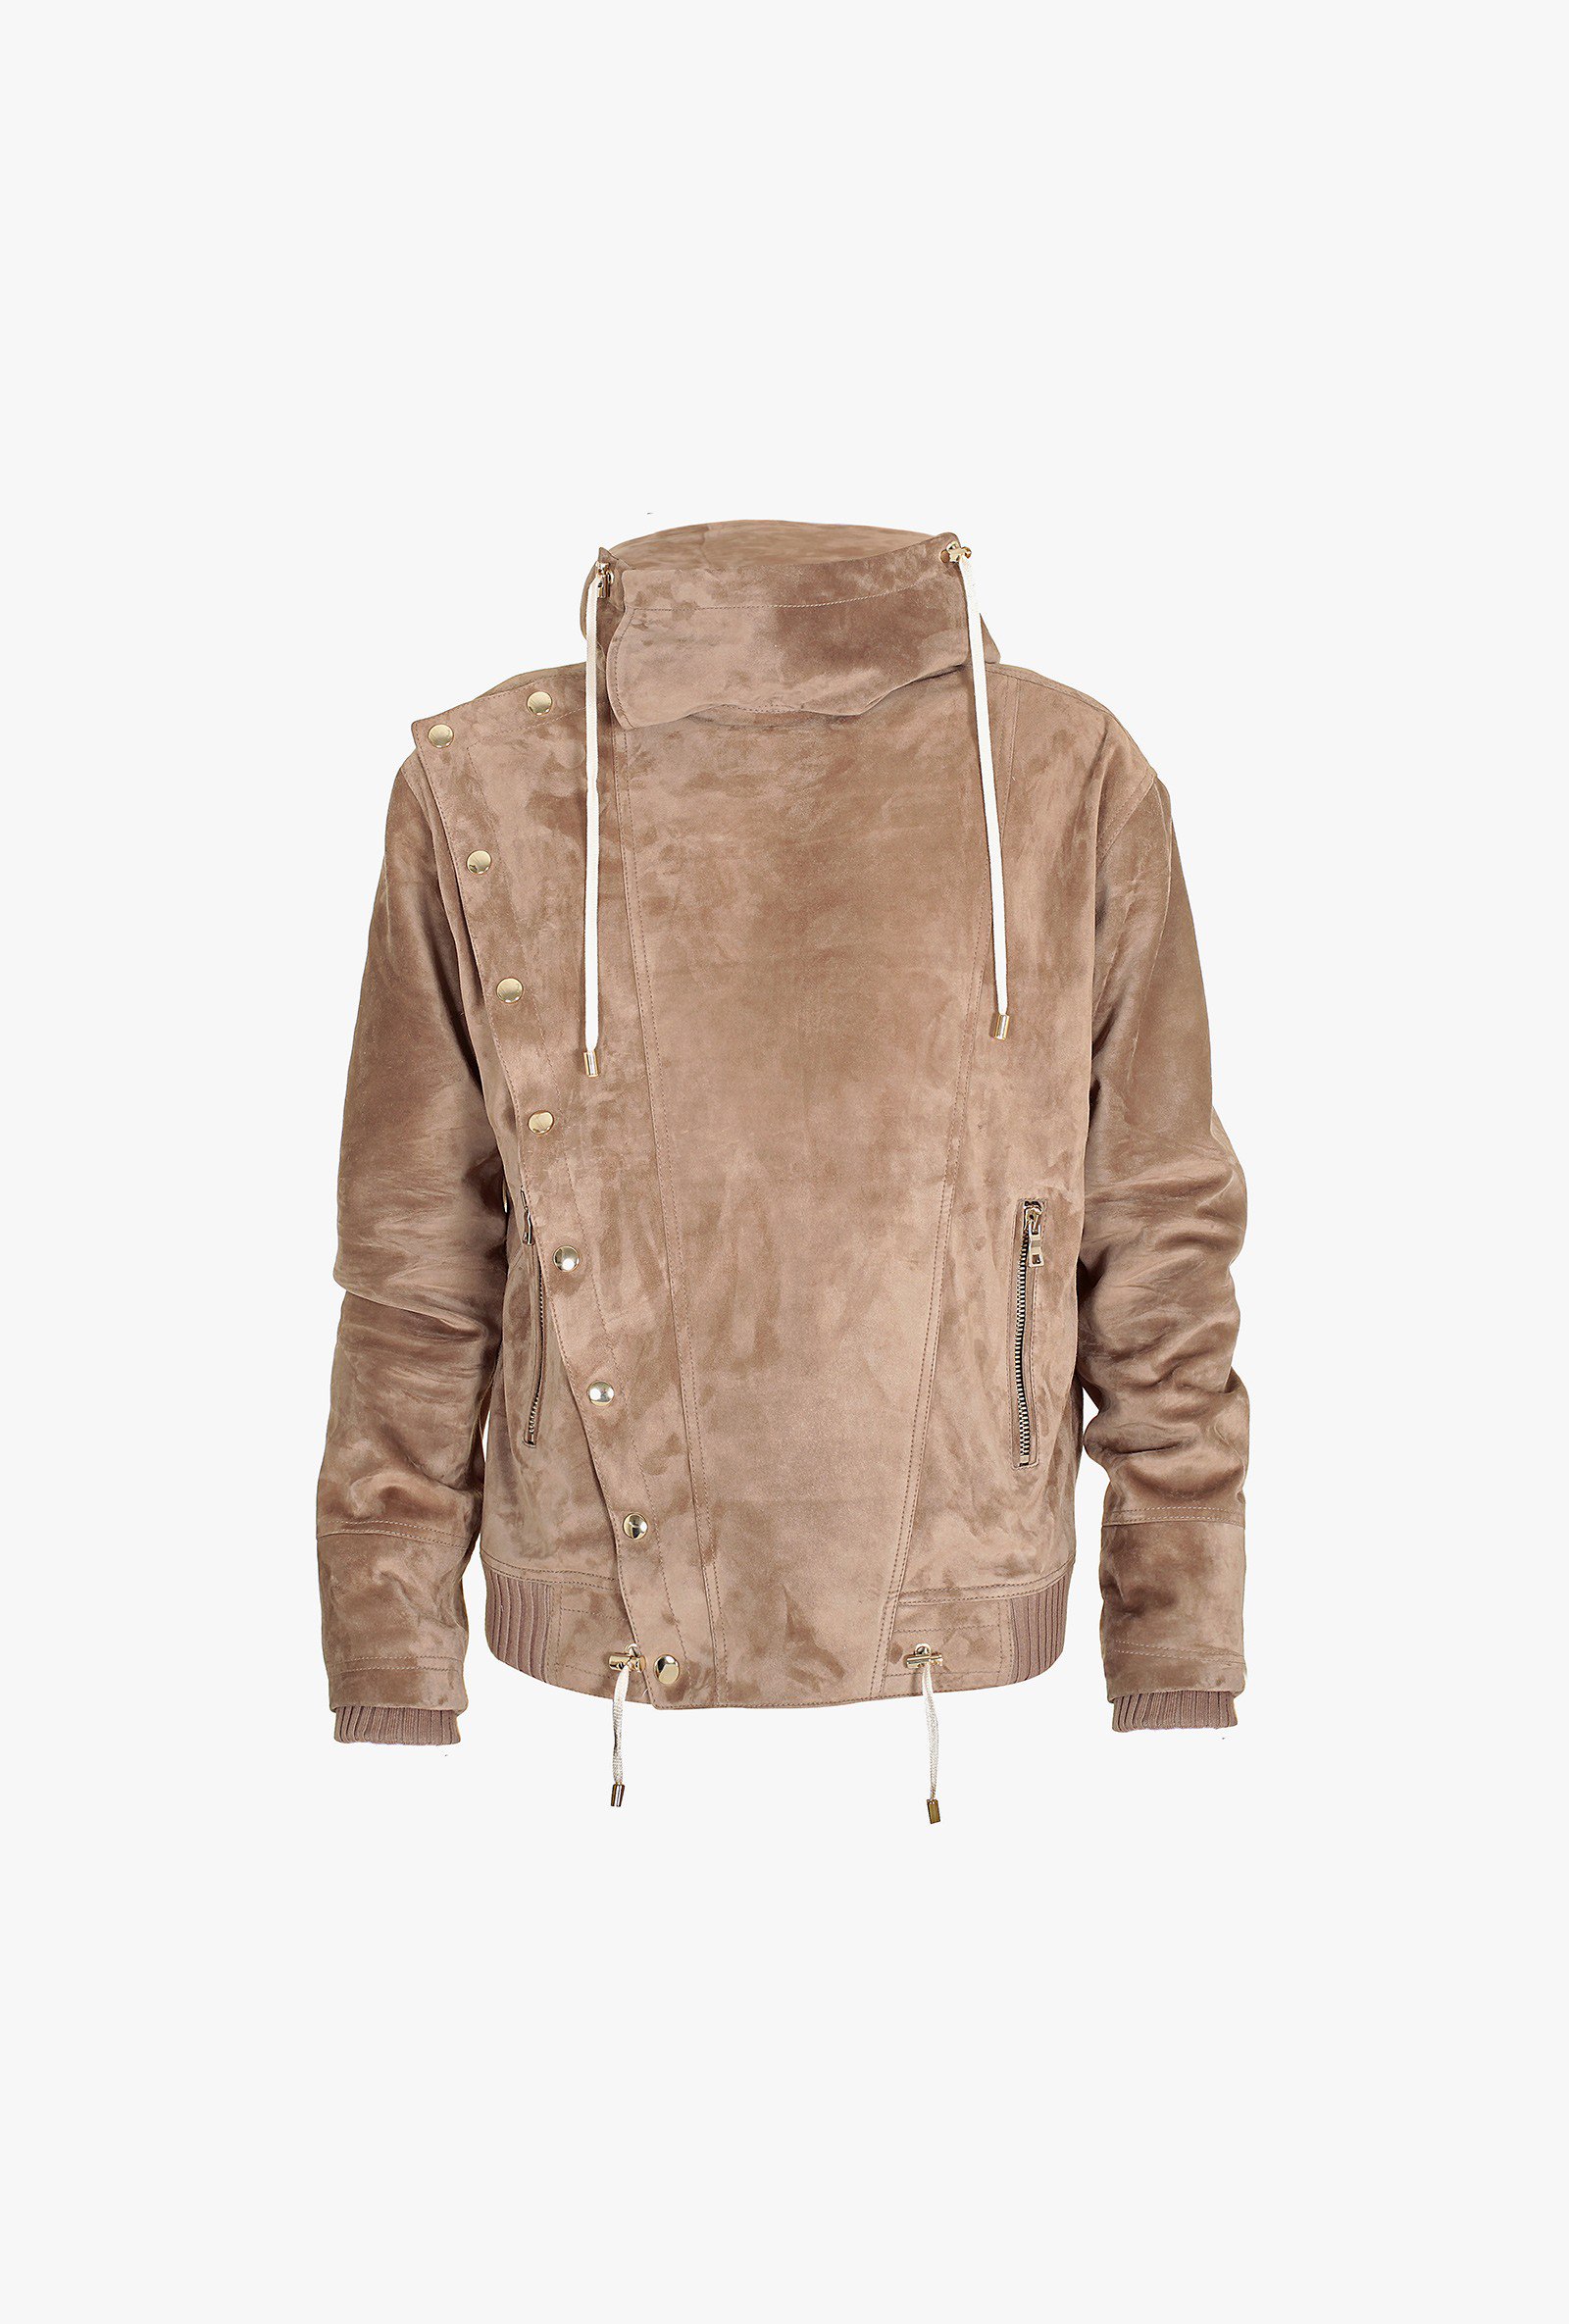 Balmain on Twitter: "New in! The Balmain Men SS16 suede jacket is now available at https://t.co/2SD3LVLSTj &gt; https://t.co/PKTZ7Vnrcv https://t.co/ffvtgMj2q8" /